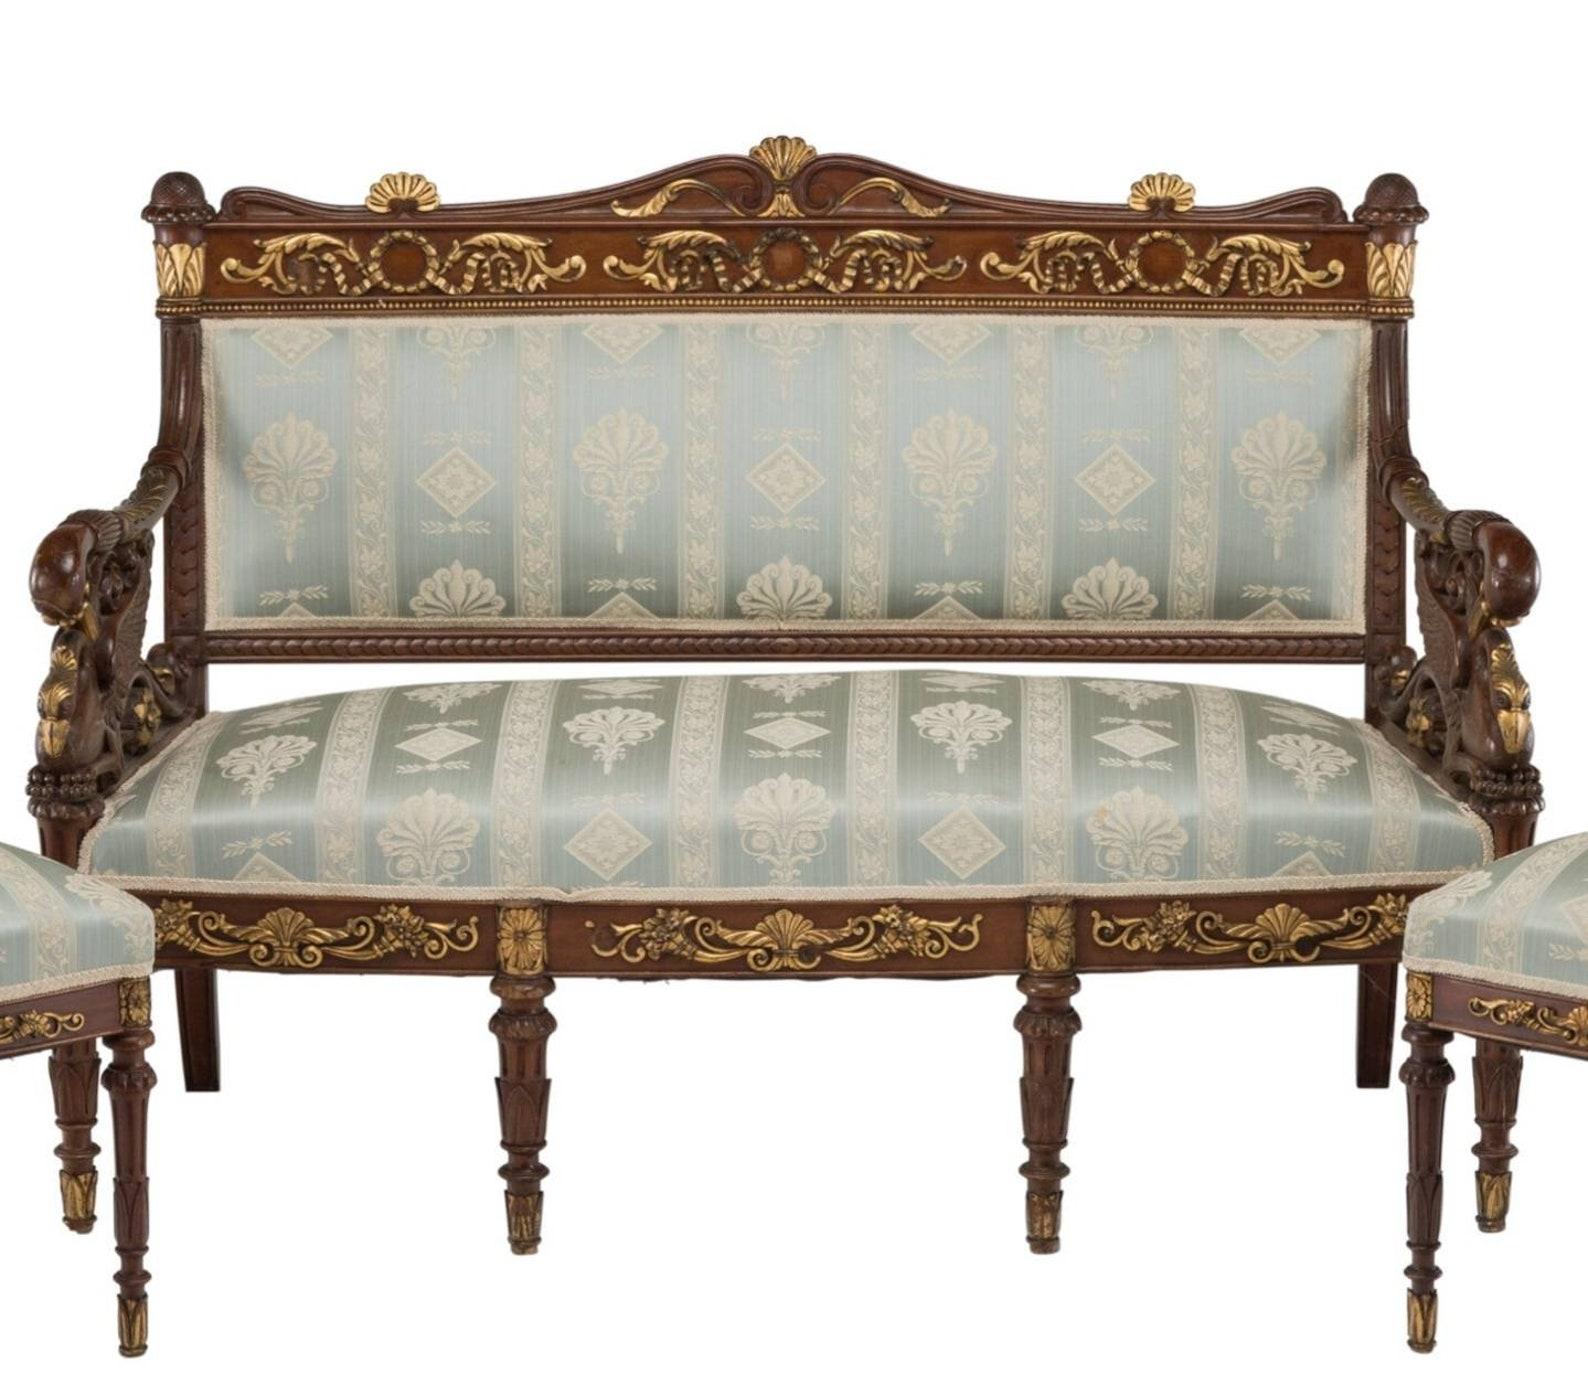 A rare and most impressive five-piece Russian neoclassical partial gilt carved wood upholstered salon suite.

Born in the 19th century, during the Russian Empire / Imperial Russia period, the suite comprised of four chairs and a settee, recently